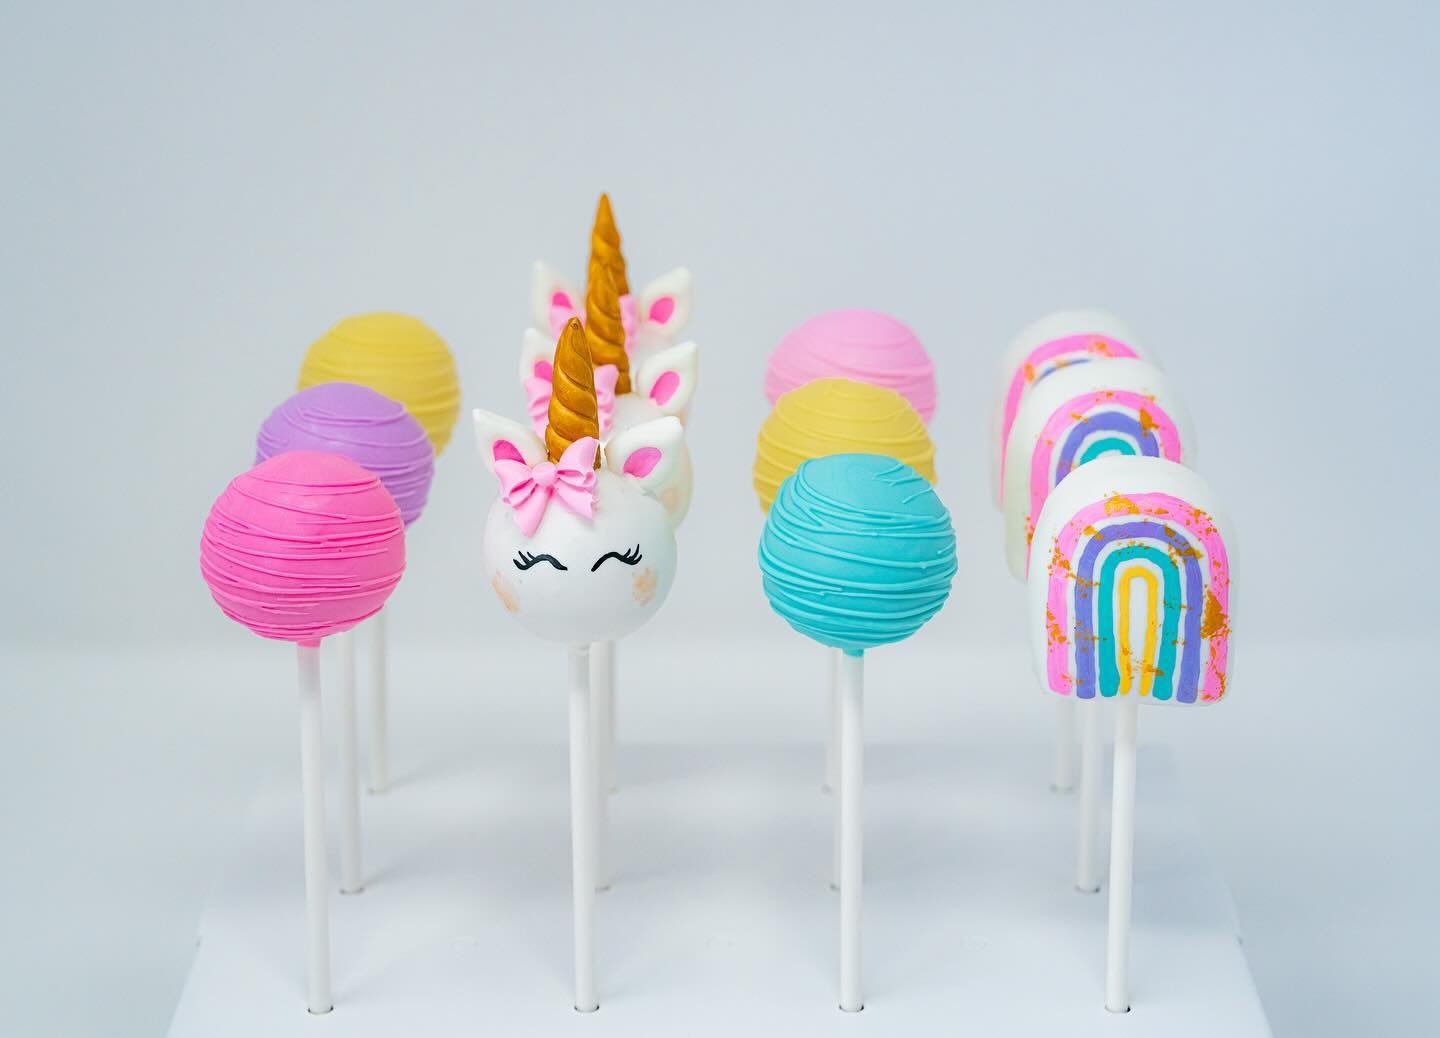 Diving into a world of pastel dreams and rainbow delights with these adorable unicorn cake pops! 🌈🦄✨ 
Let the birthday magic begin! 🎉🍭
~~~
#katespoperella #cakepops #happybirthday #sweettreats 
#unicorn #cakepopsofinstagram #custom #cakepop #cute